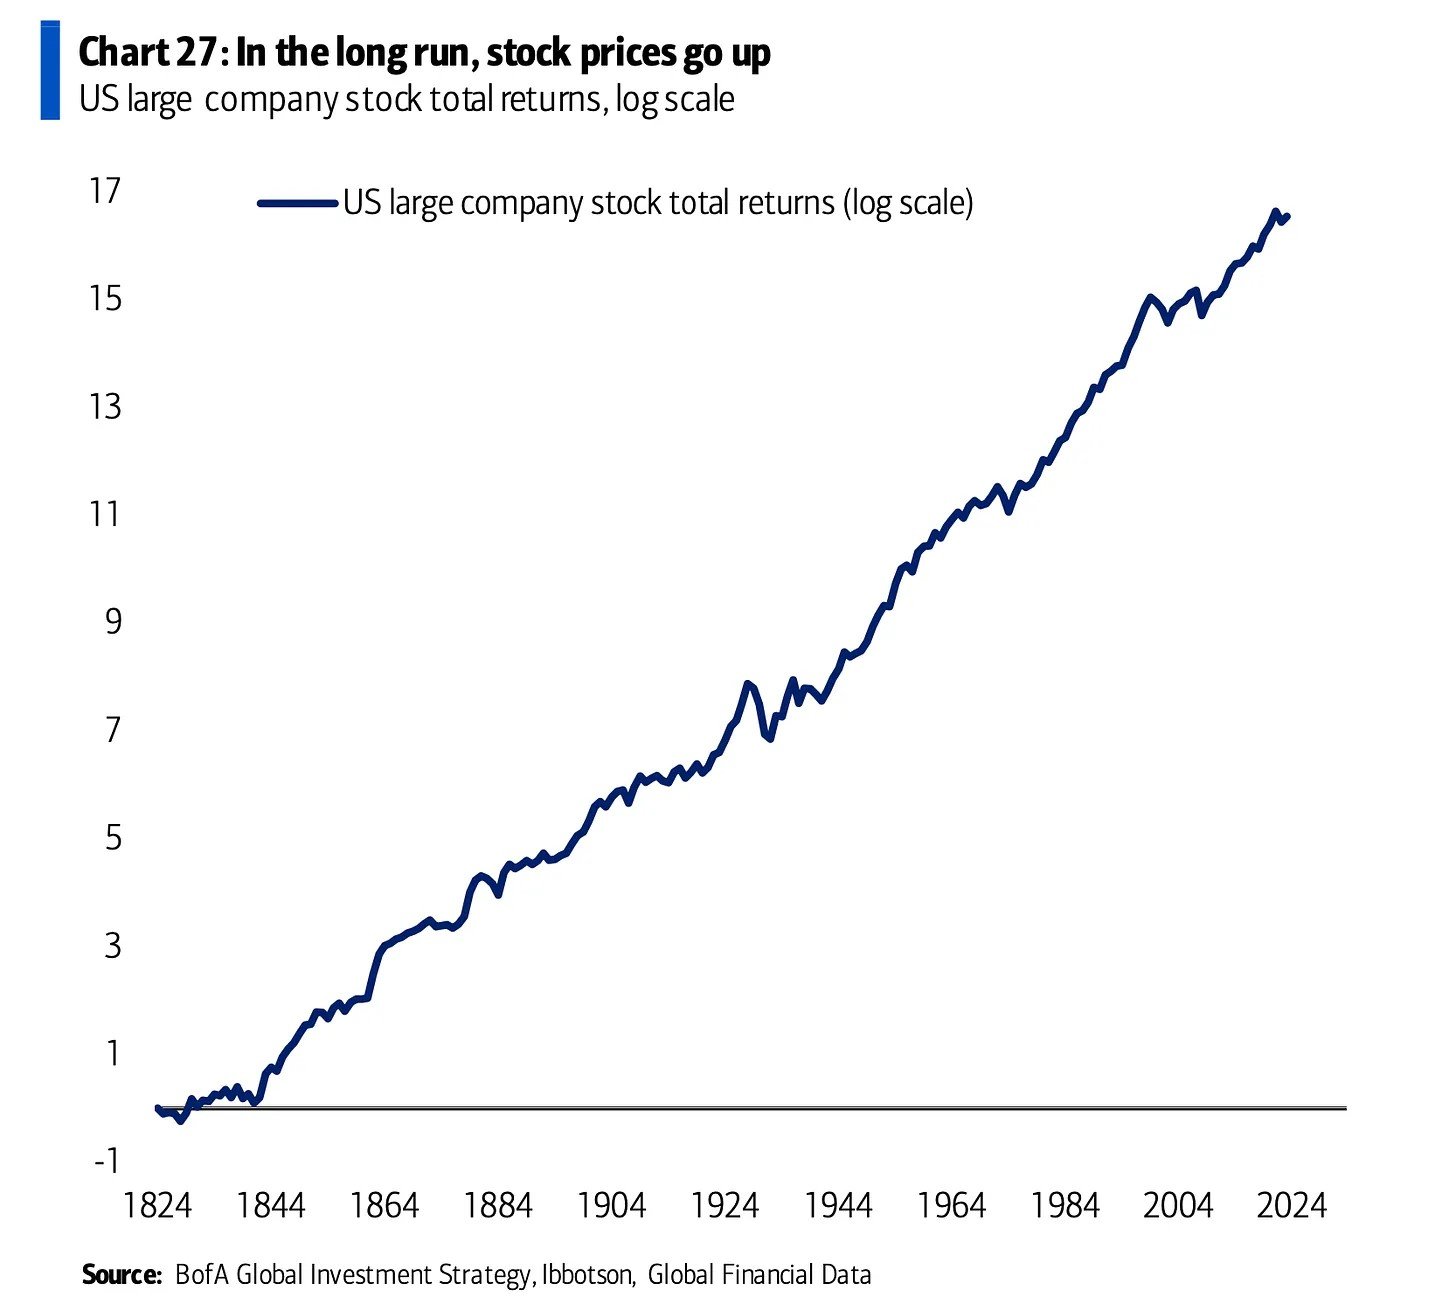 chart shows upward climb of stock returns in navy blue from 1824 to 2024